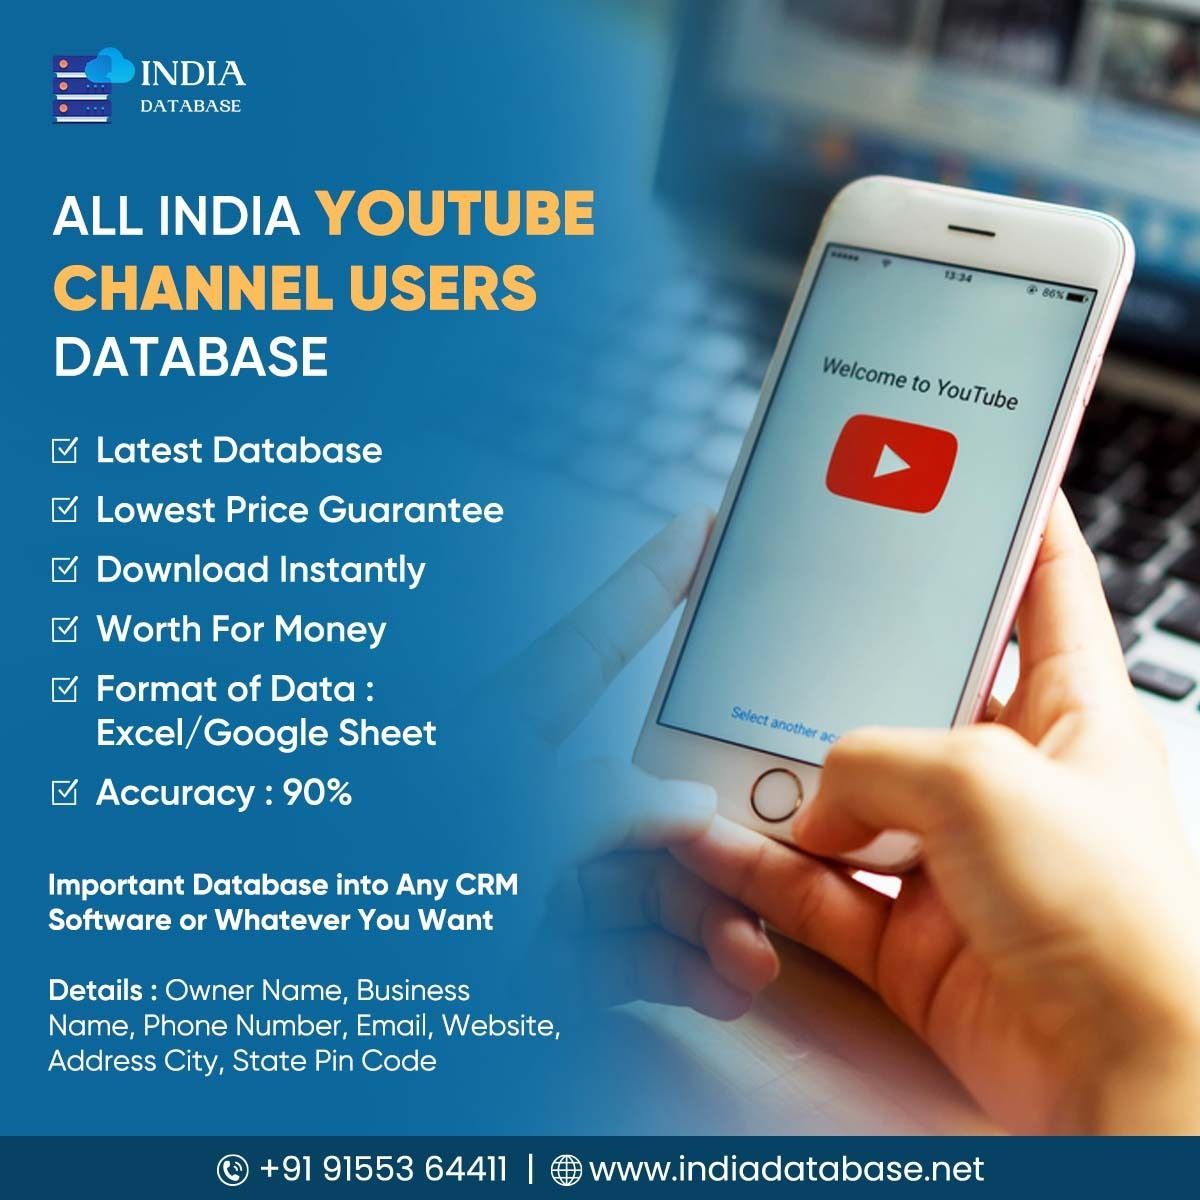 All India Youtube Channel Users Database